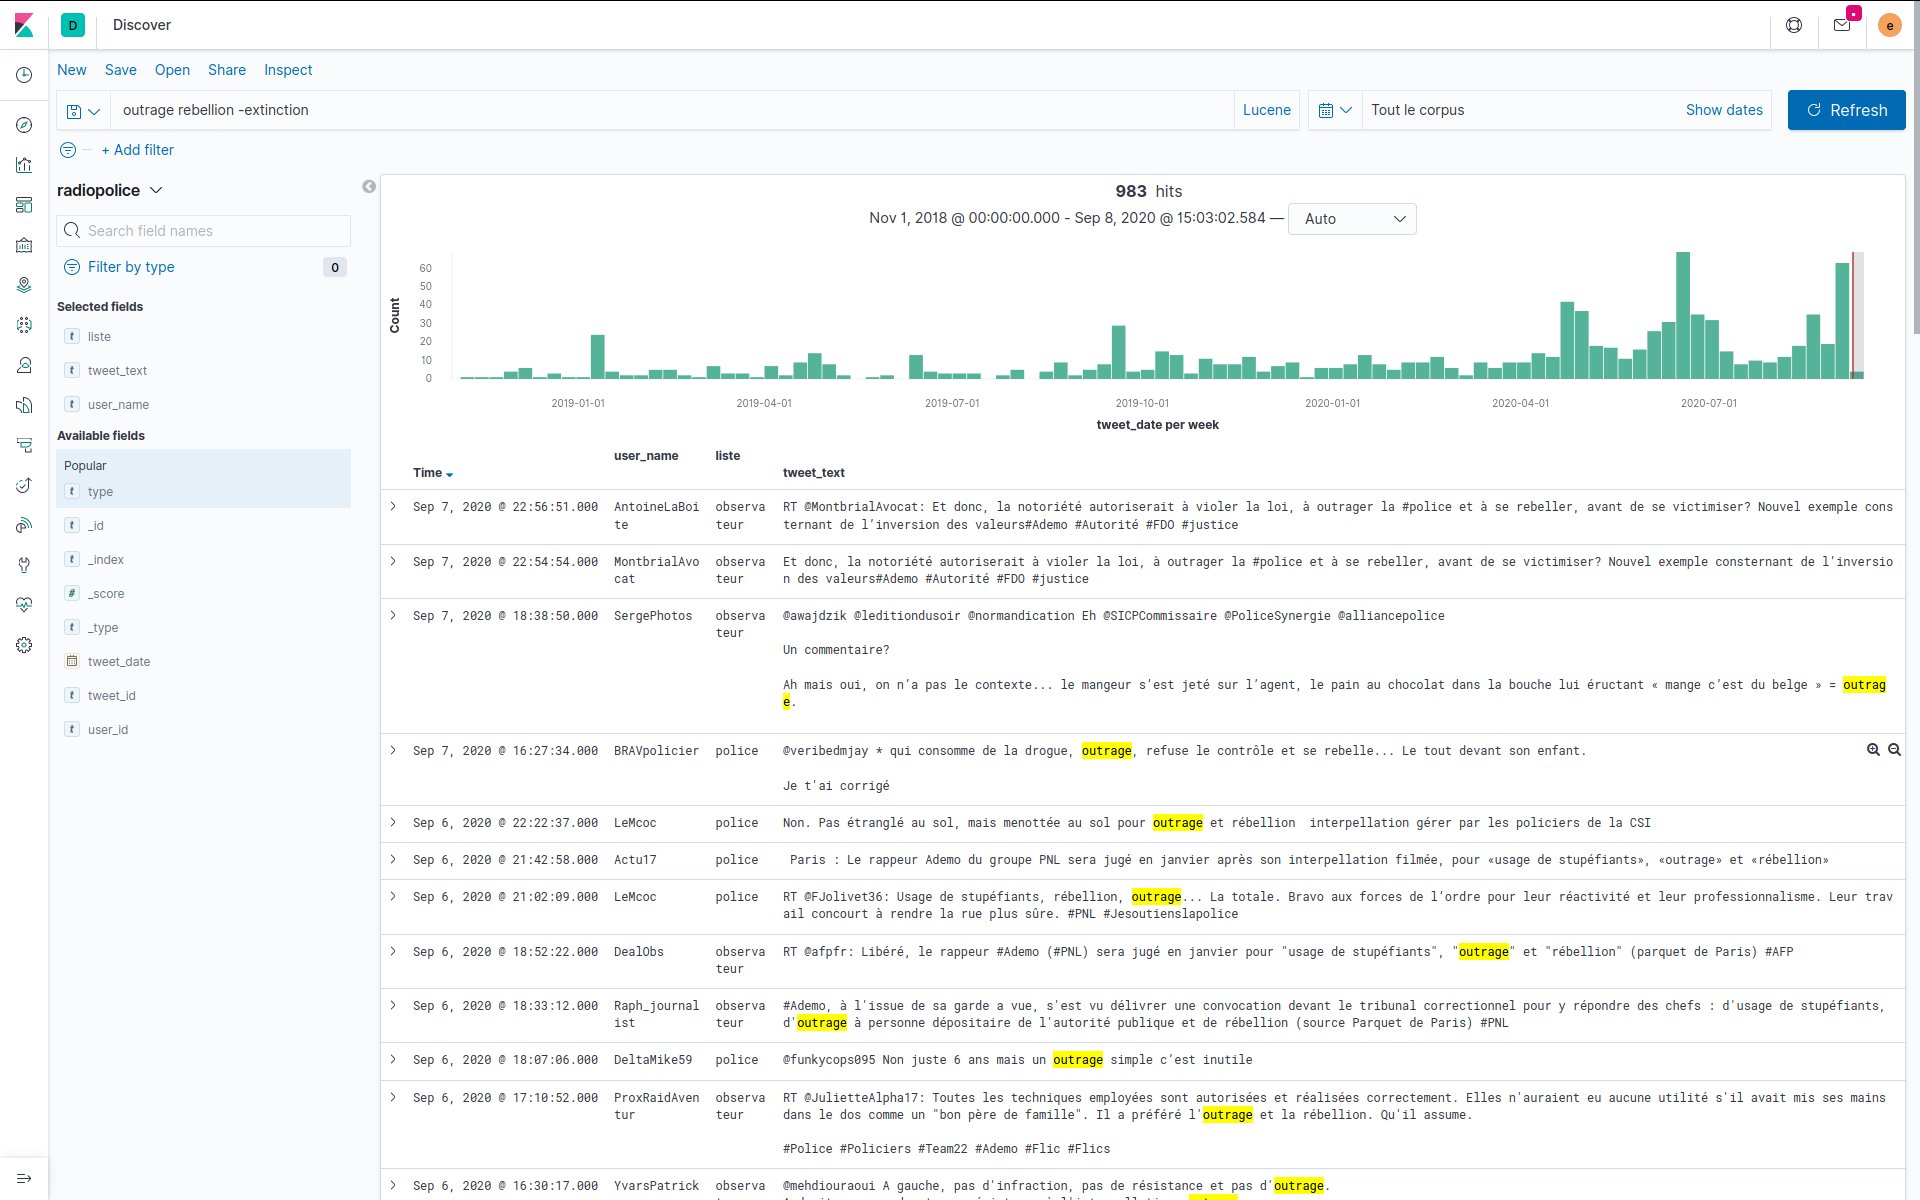 Building the theme "outrage" as a search query in Kibana